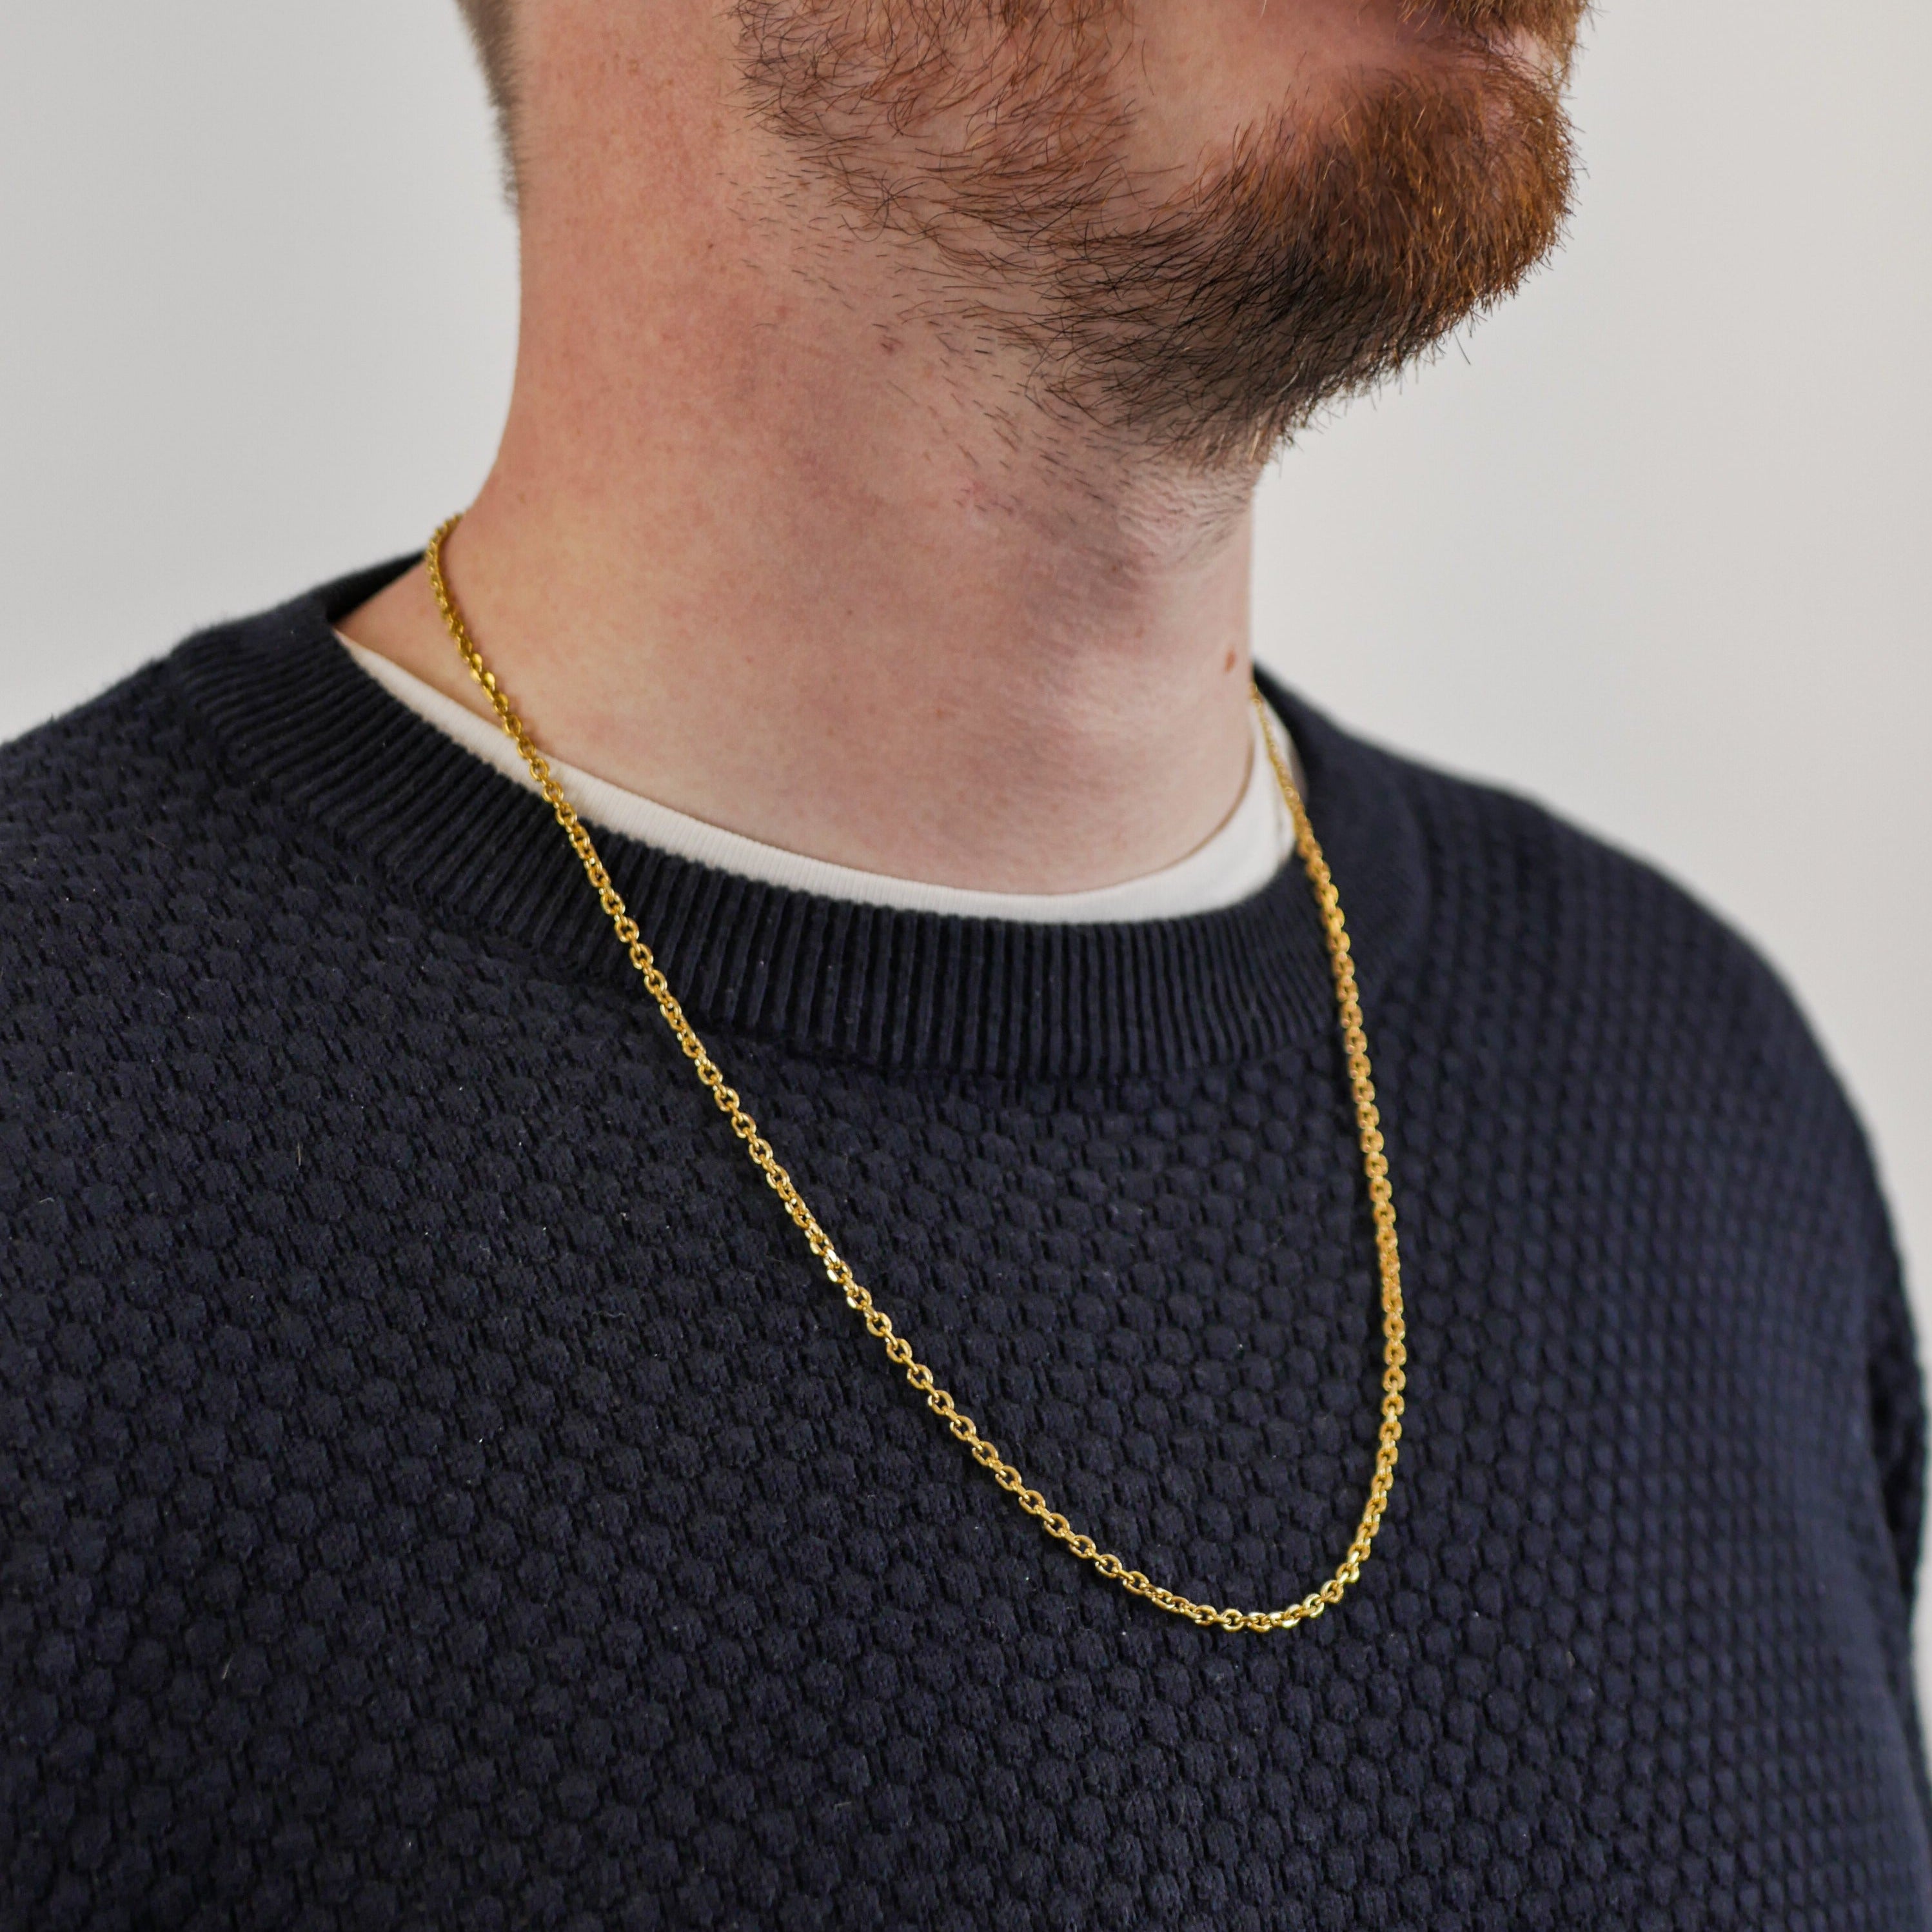 NL Cable necklace - Gold-toned